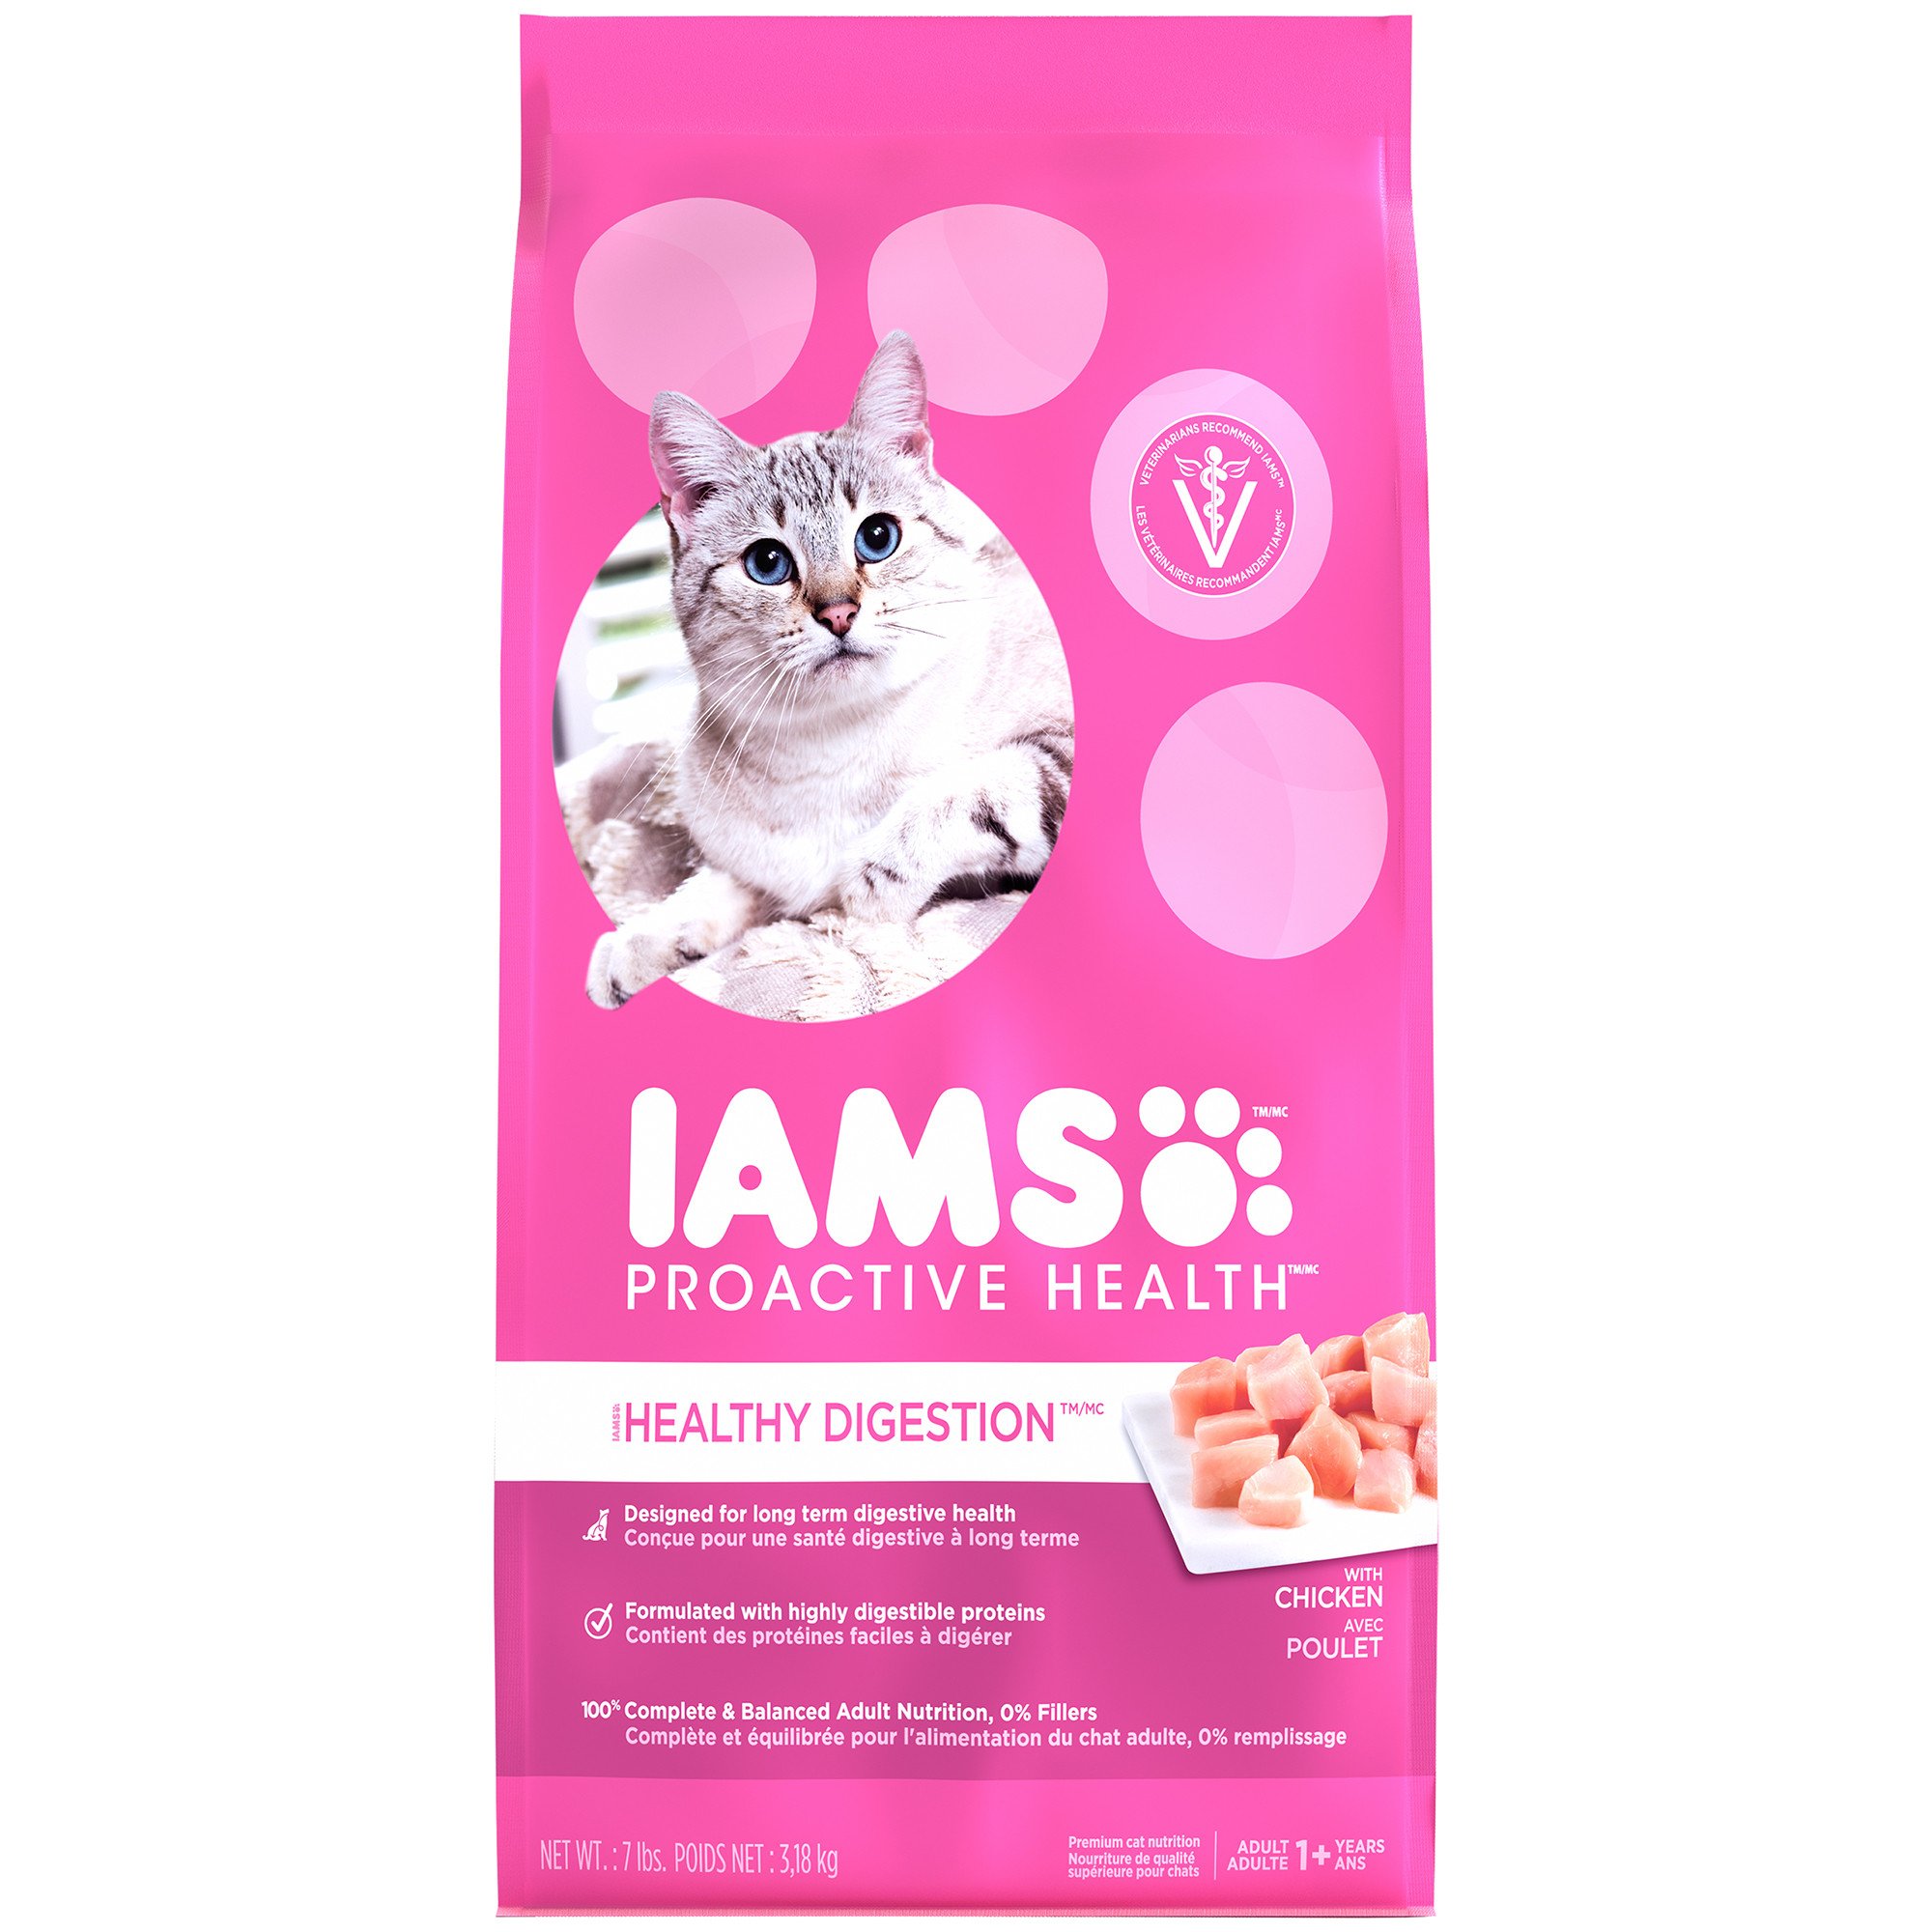 UPC 019014712366 product image for Iams ProActive Health Healthy Digestion Dry Cat Food, 7 lbs. | upcitemdb.com